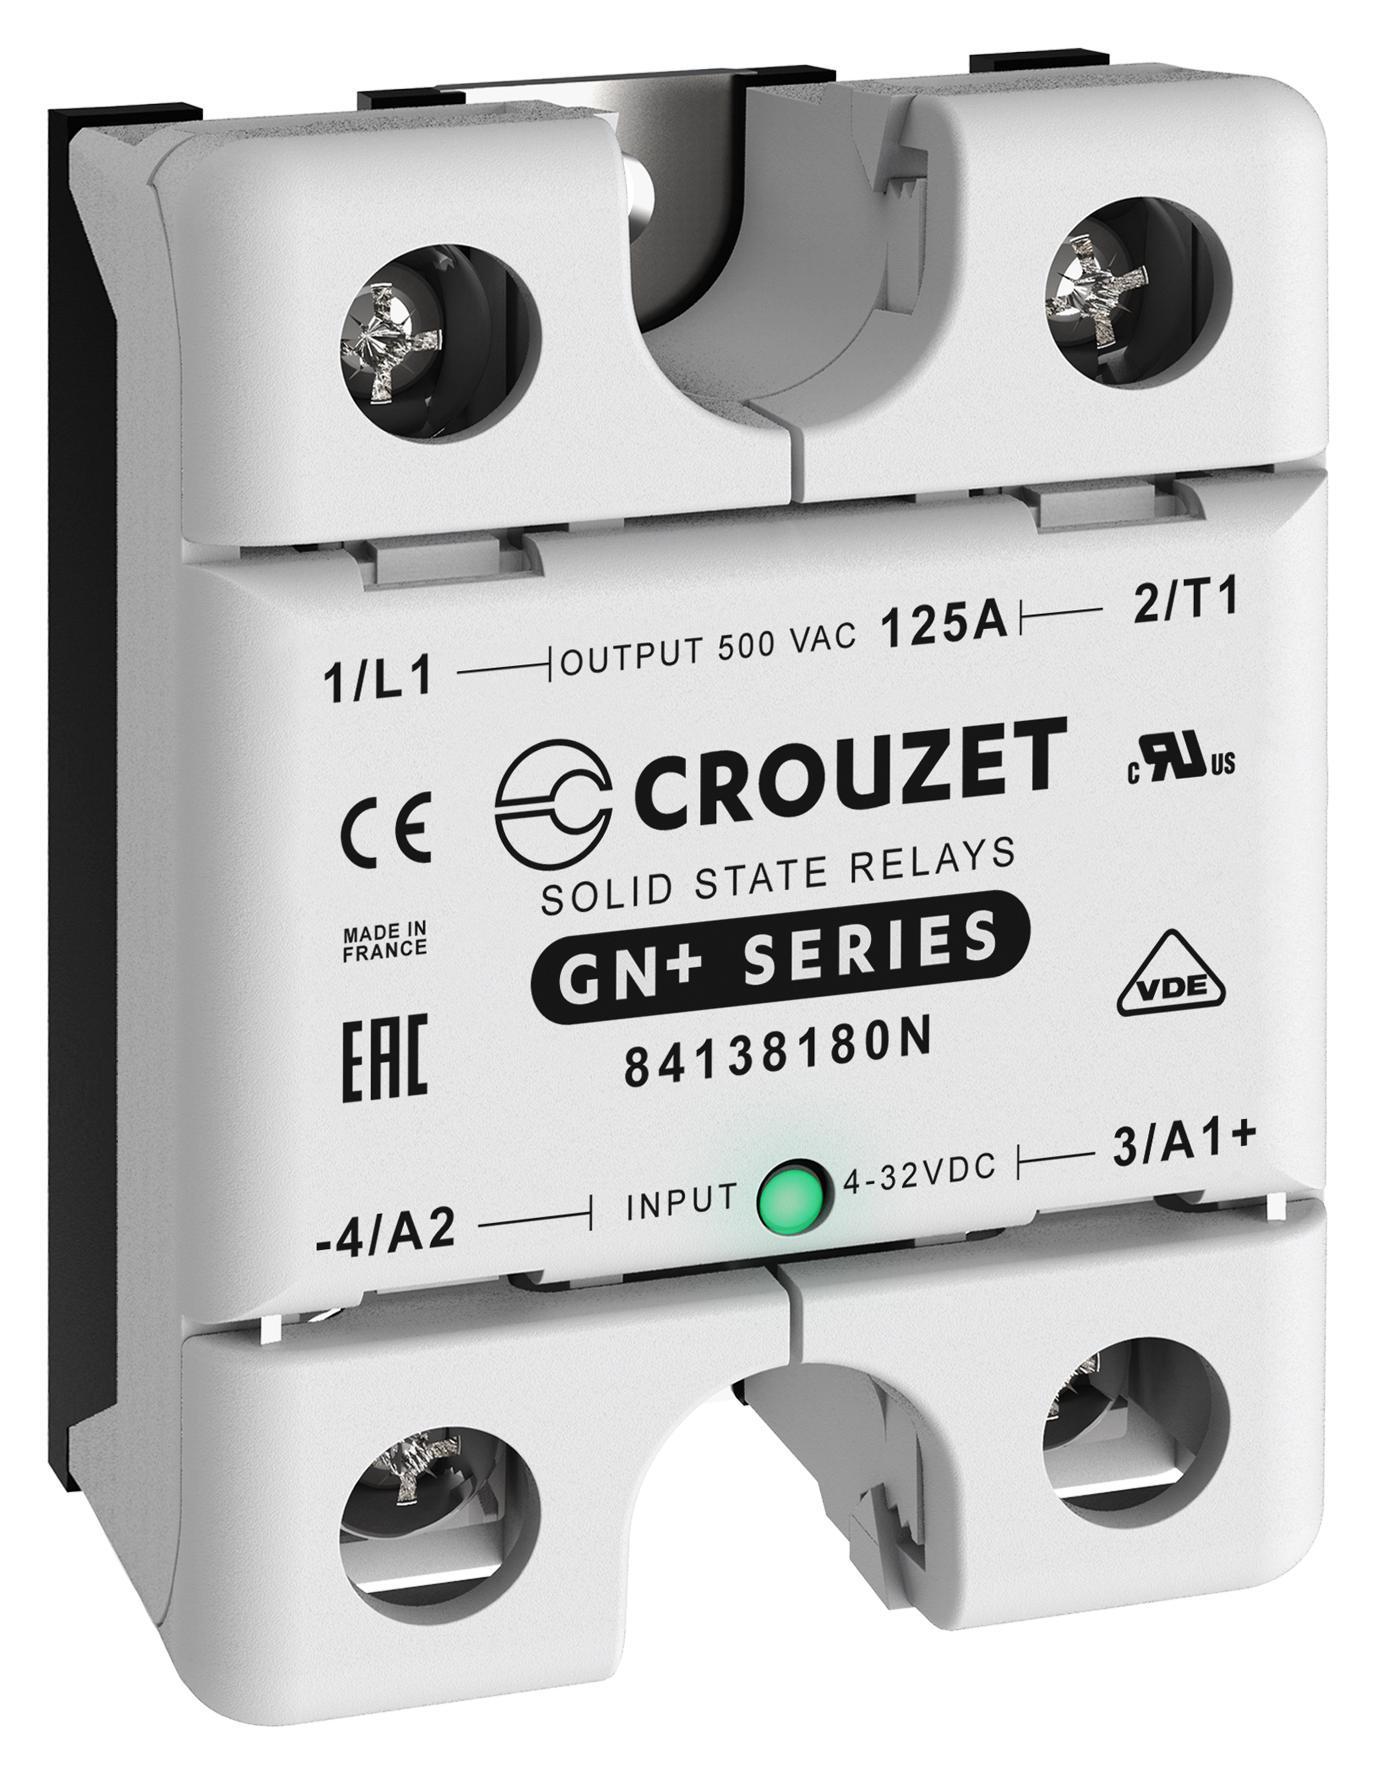 84138180N SOLID STATE RELAY, 125A, 24-500VAC/PANEL CROUZET